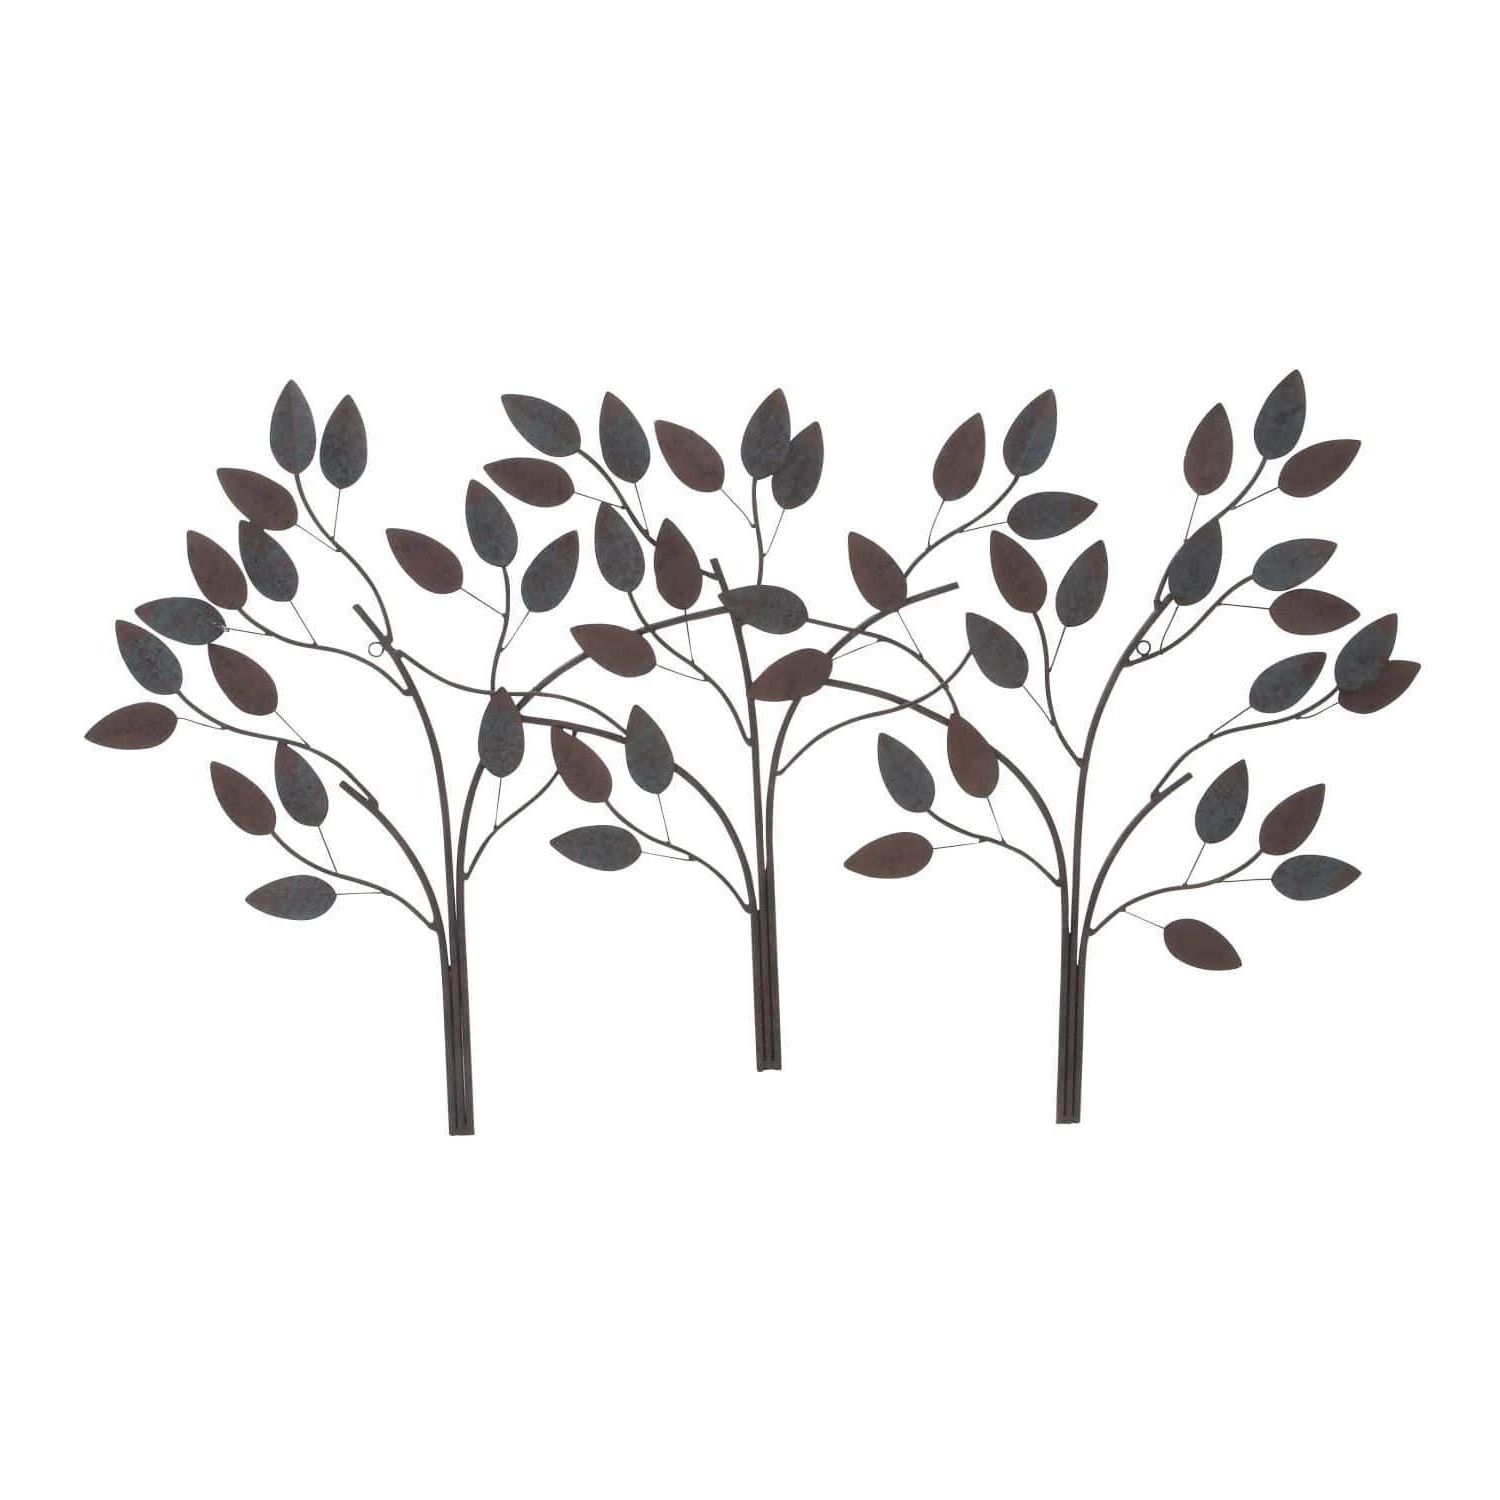 Desford Leaf Wall Decor With Widely Used Studio 350 Metal Leaf Wall Decor 48 Inches Wide, 27 Inches High (View 3 of 20)